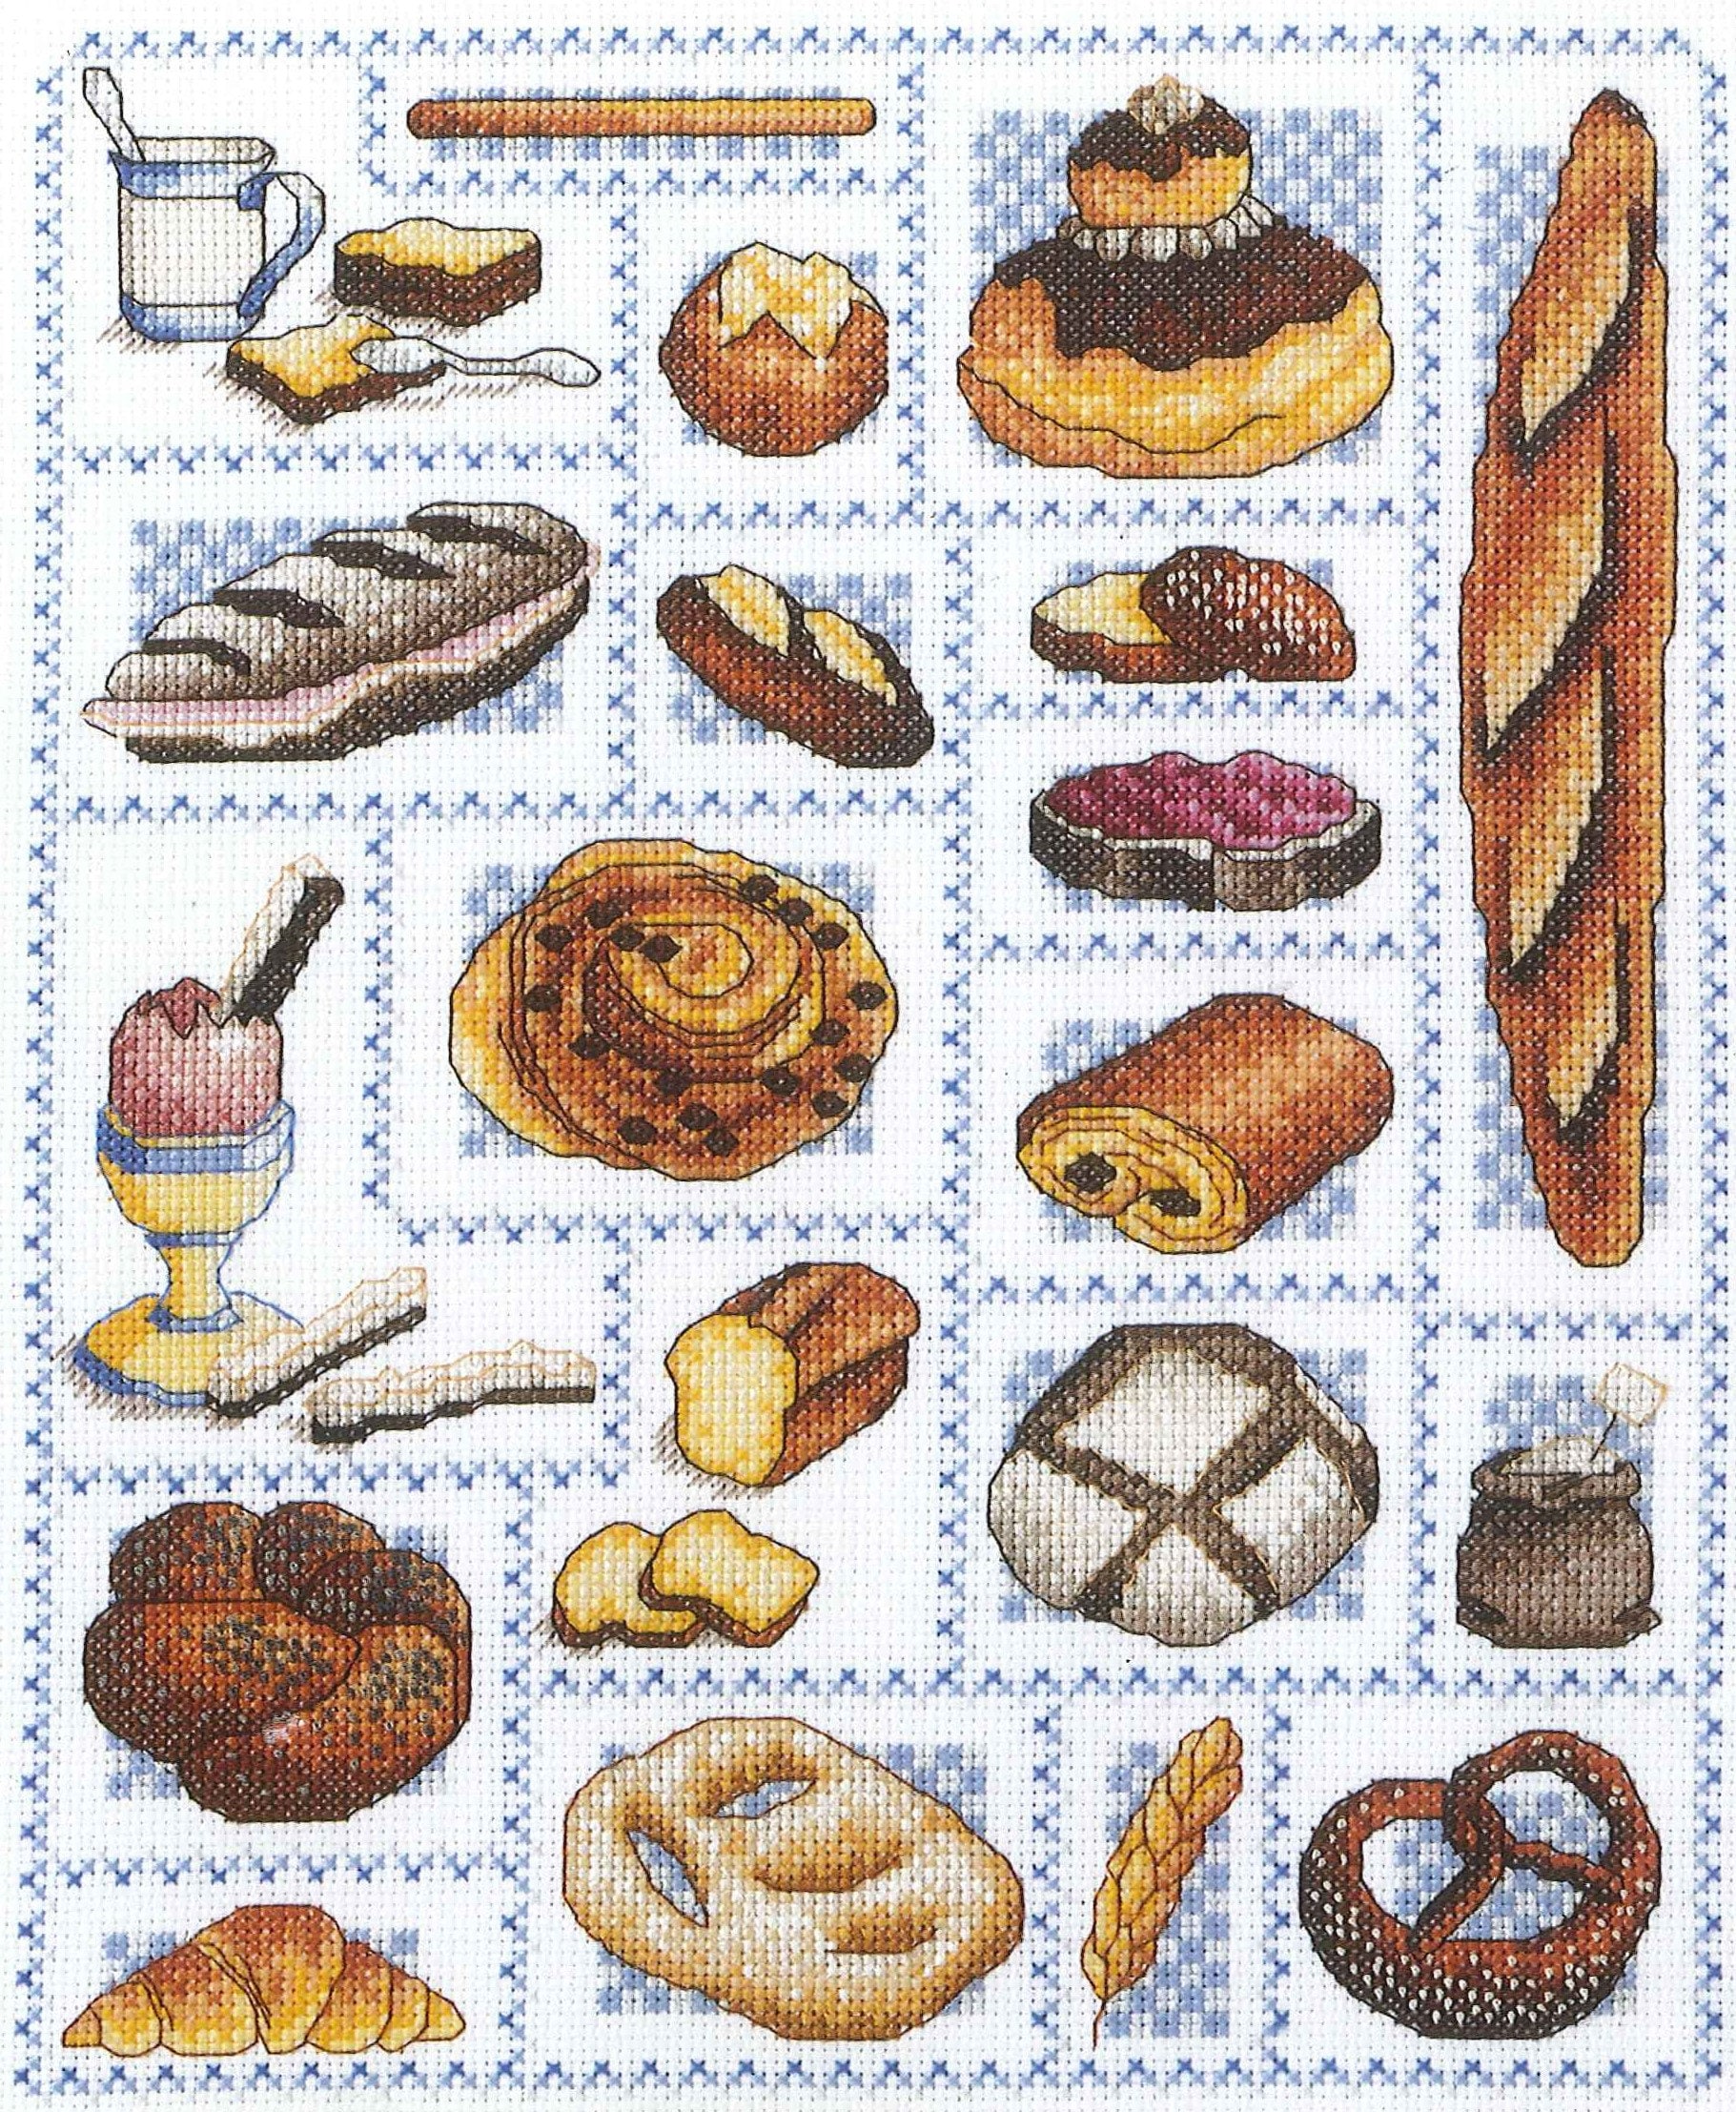 Juicy Lucy Eat Cake for Breakfast Cross Stitch Chart 